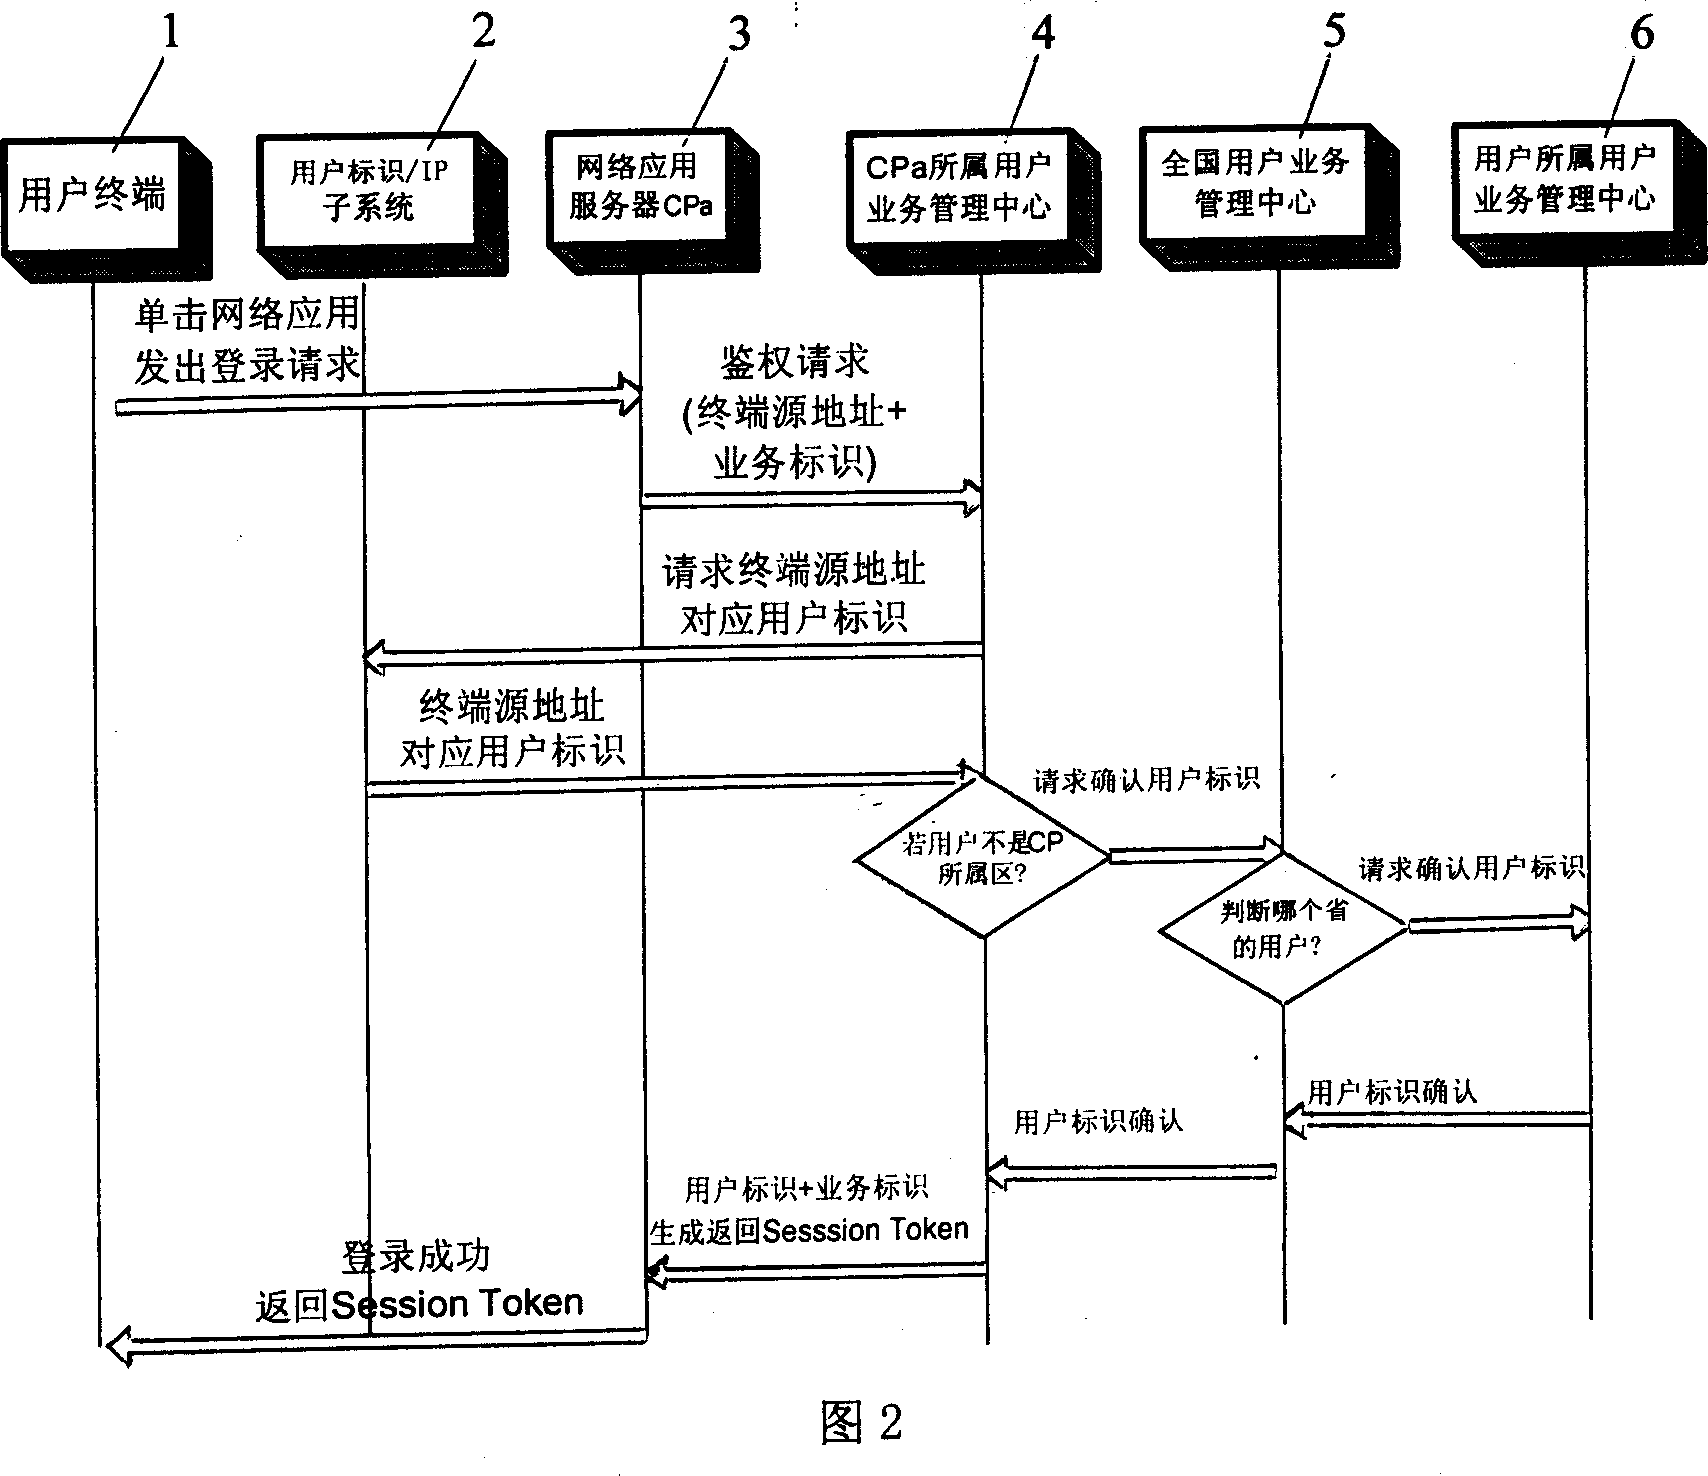 System and method for network accession utilizing single clicking single pointing